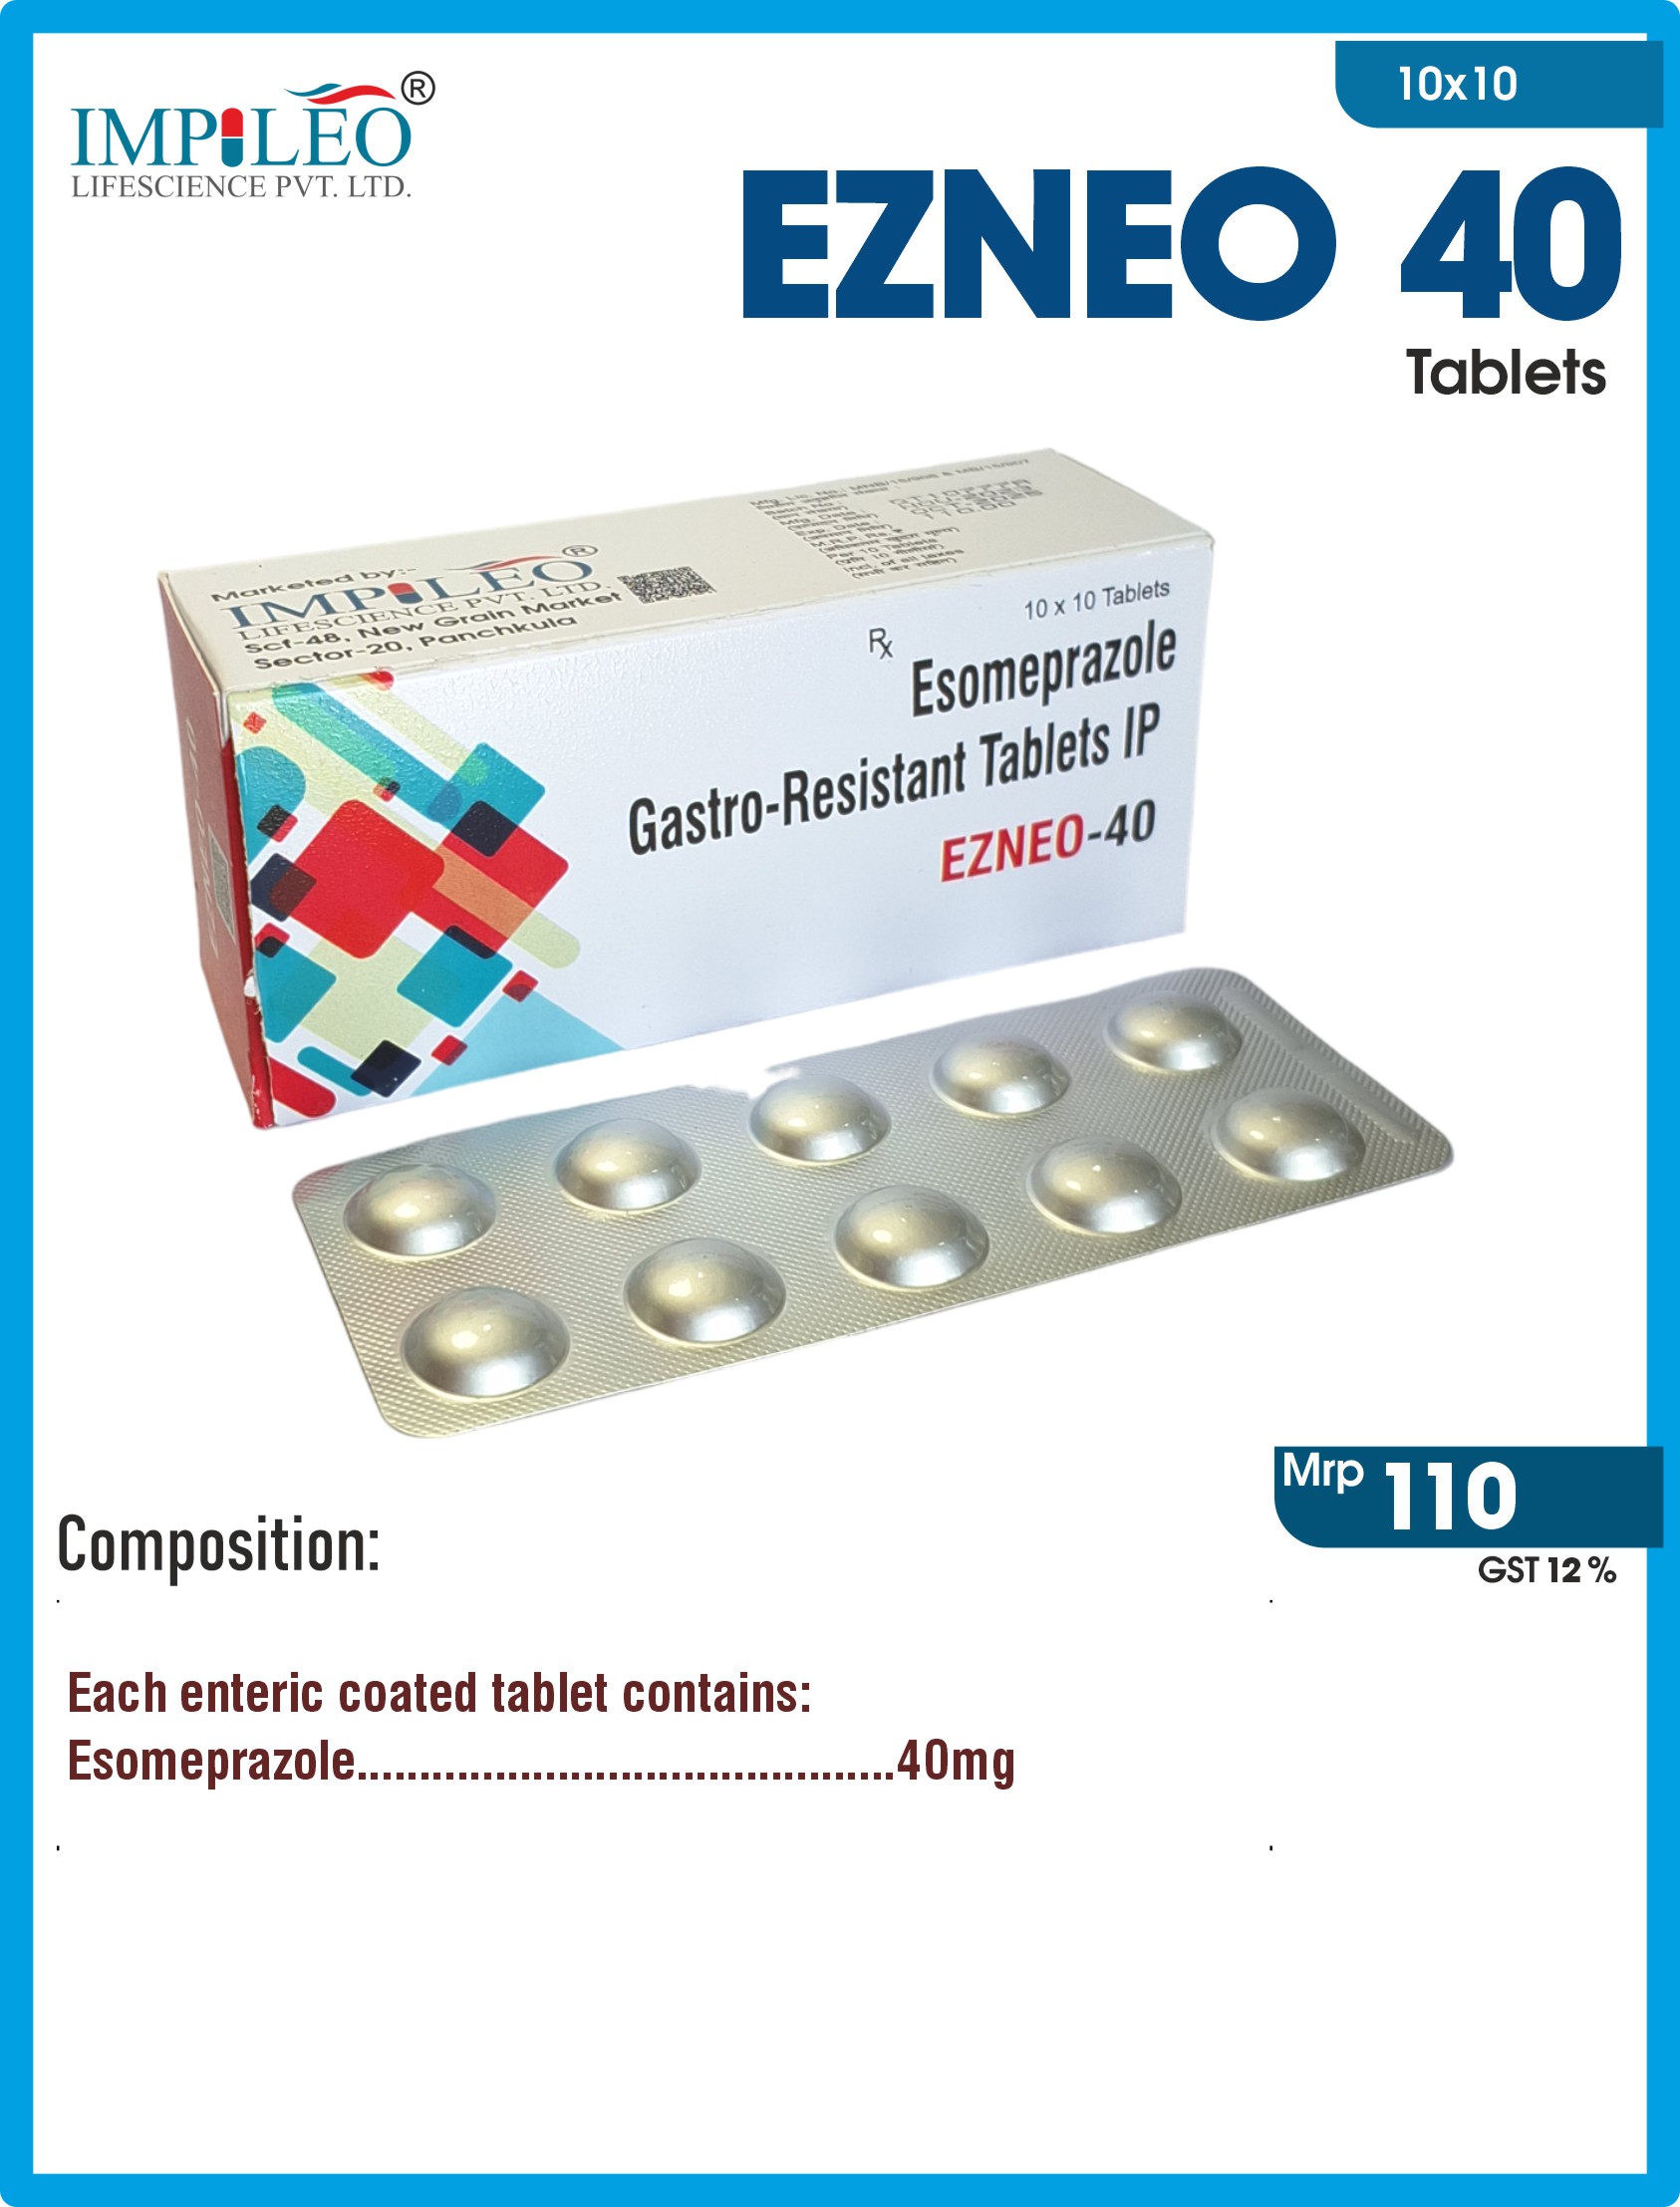 Optimize Digestive Health : Join Forces with Premier PCD Pharma Franchise in India for Lansoprazole EZNEO-40 Tablet